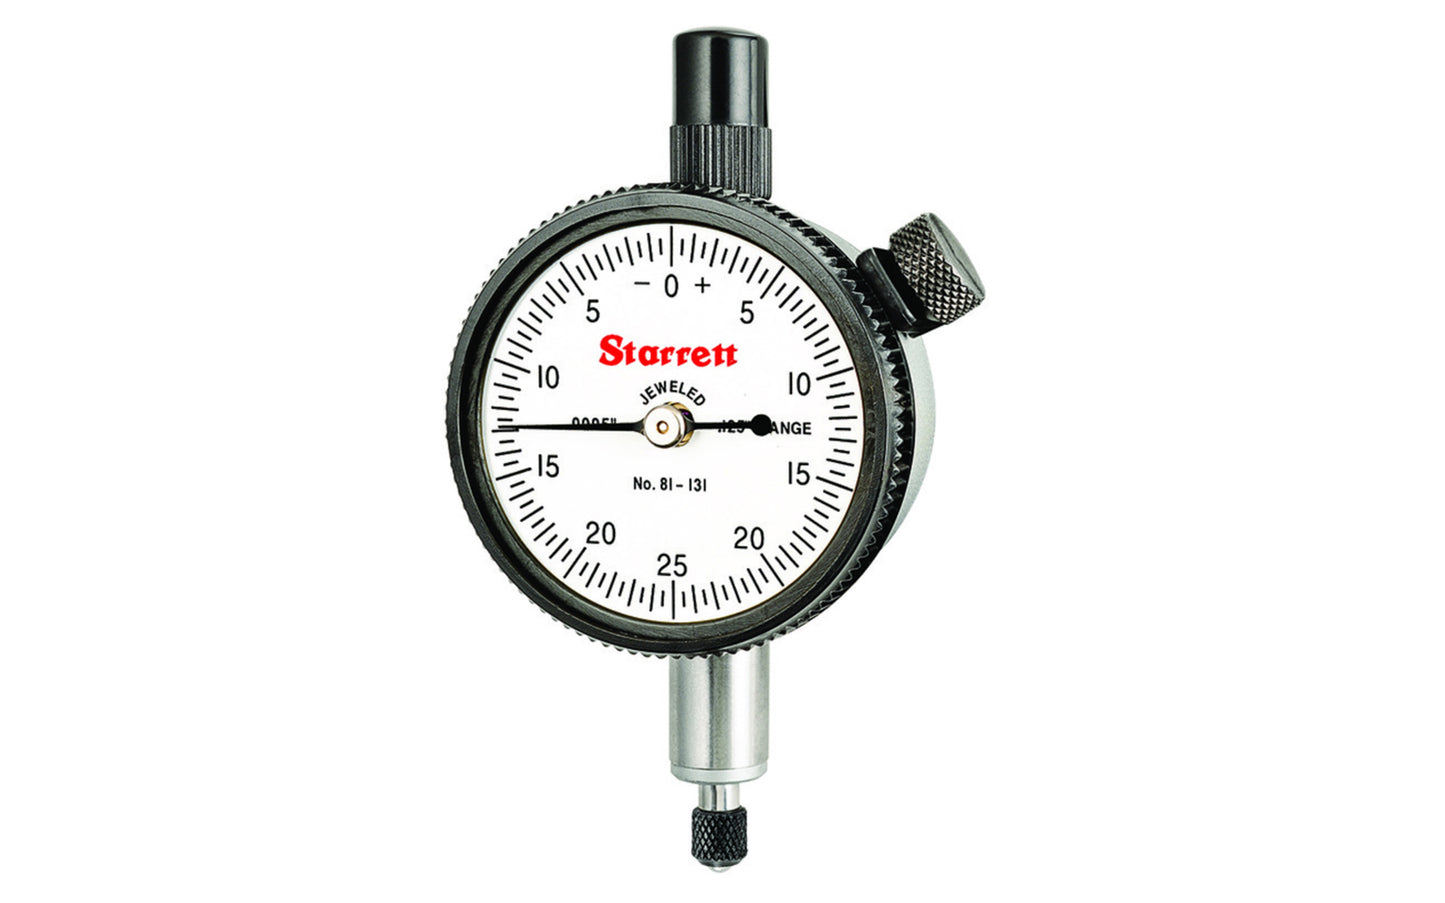 Starrett 81 Series Dial Indicator has a shockless, hardened steel gear train and jewel bearings. It is furnished with a lug-on-center back. Antimagnetic and special non-shock mechanisms are options available for all models. .125" Range, Dial Reading 0-25-0, .0005" Grad.   Made in USA.